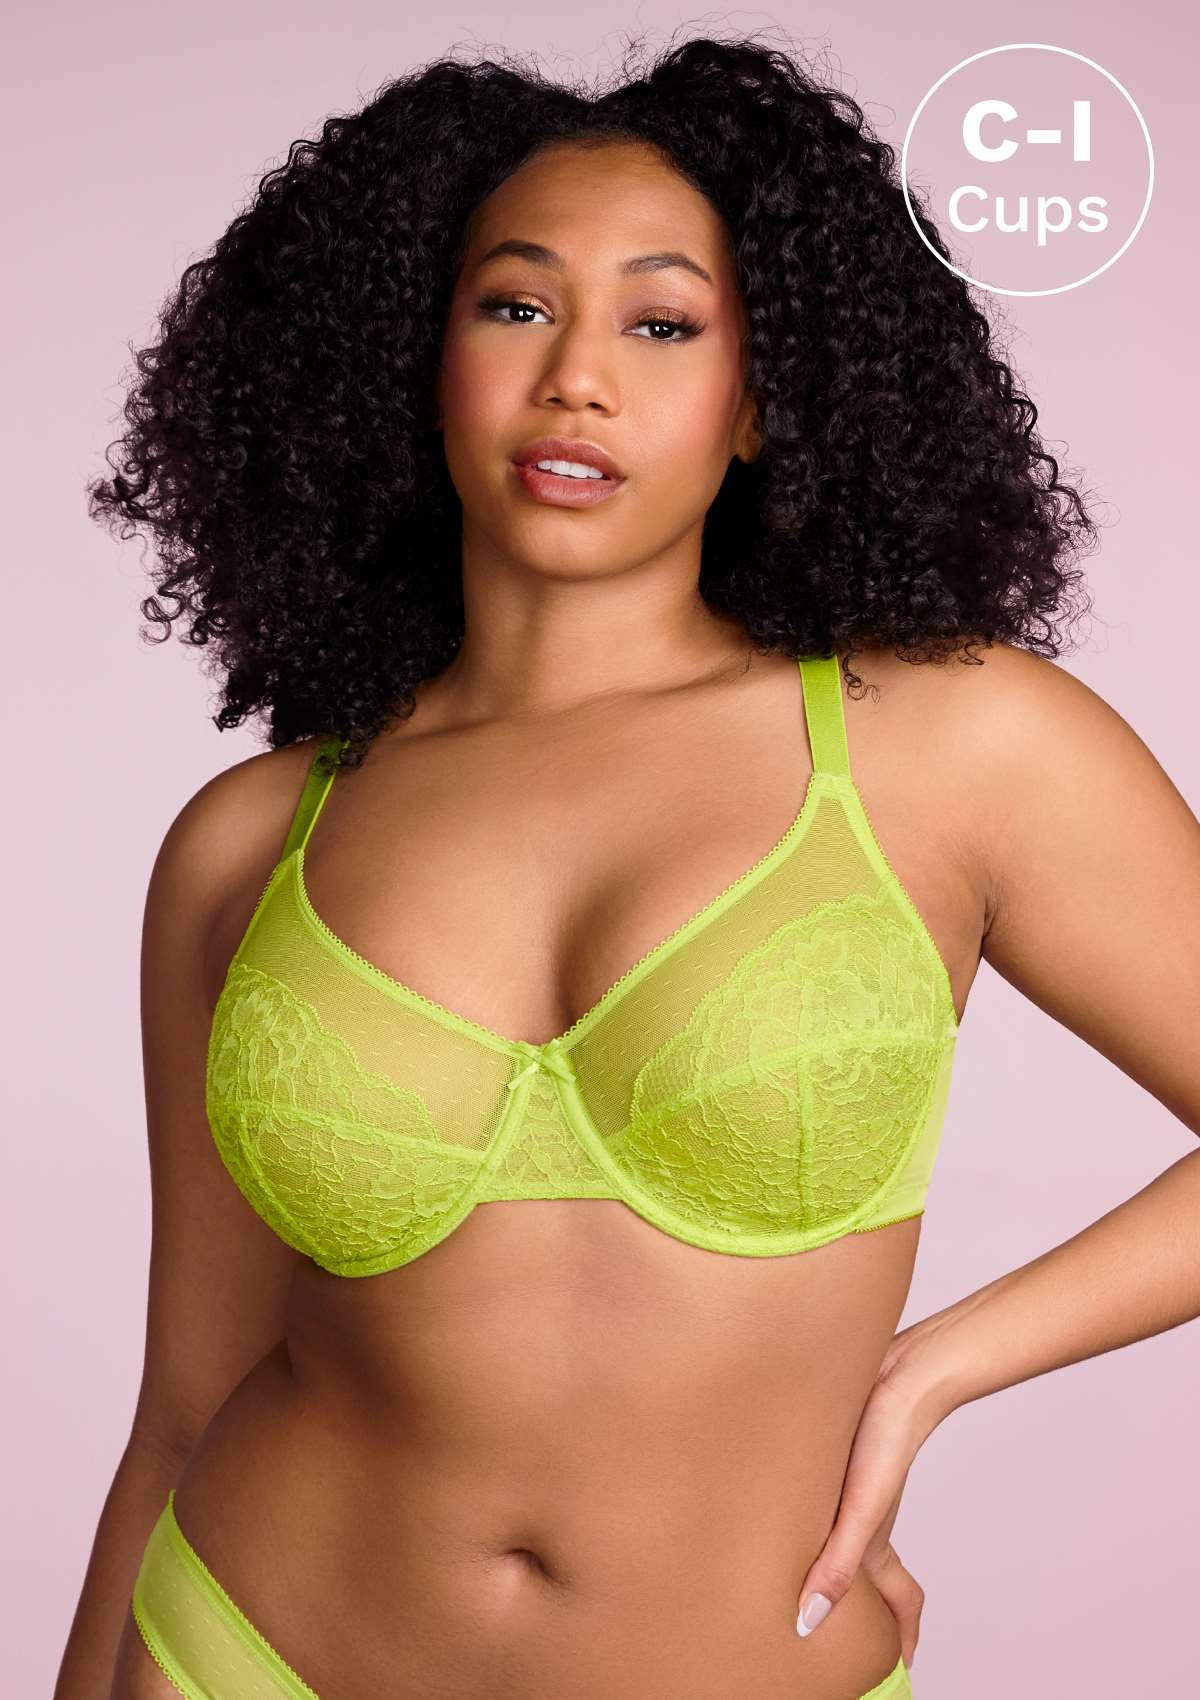 HSIA Enchante Full Cup Minimizing Bra: Supportive Unlined Lace Bra - Lime Green / 46 / C